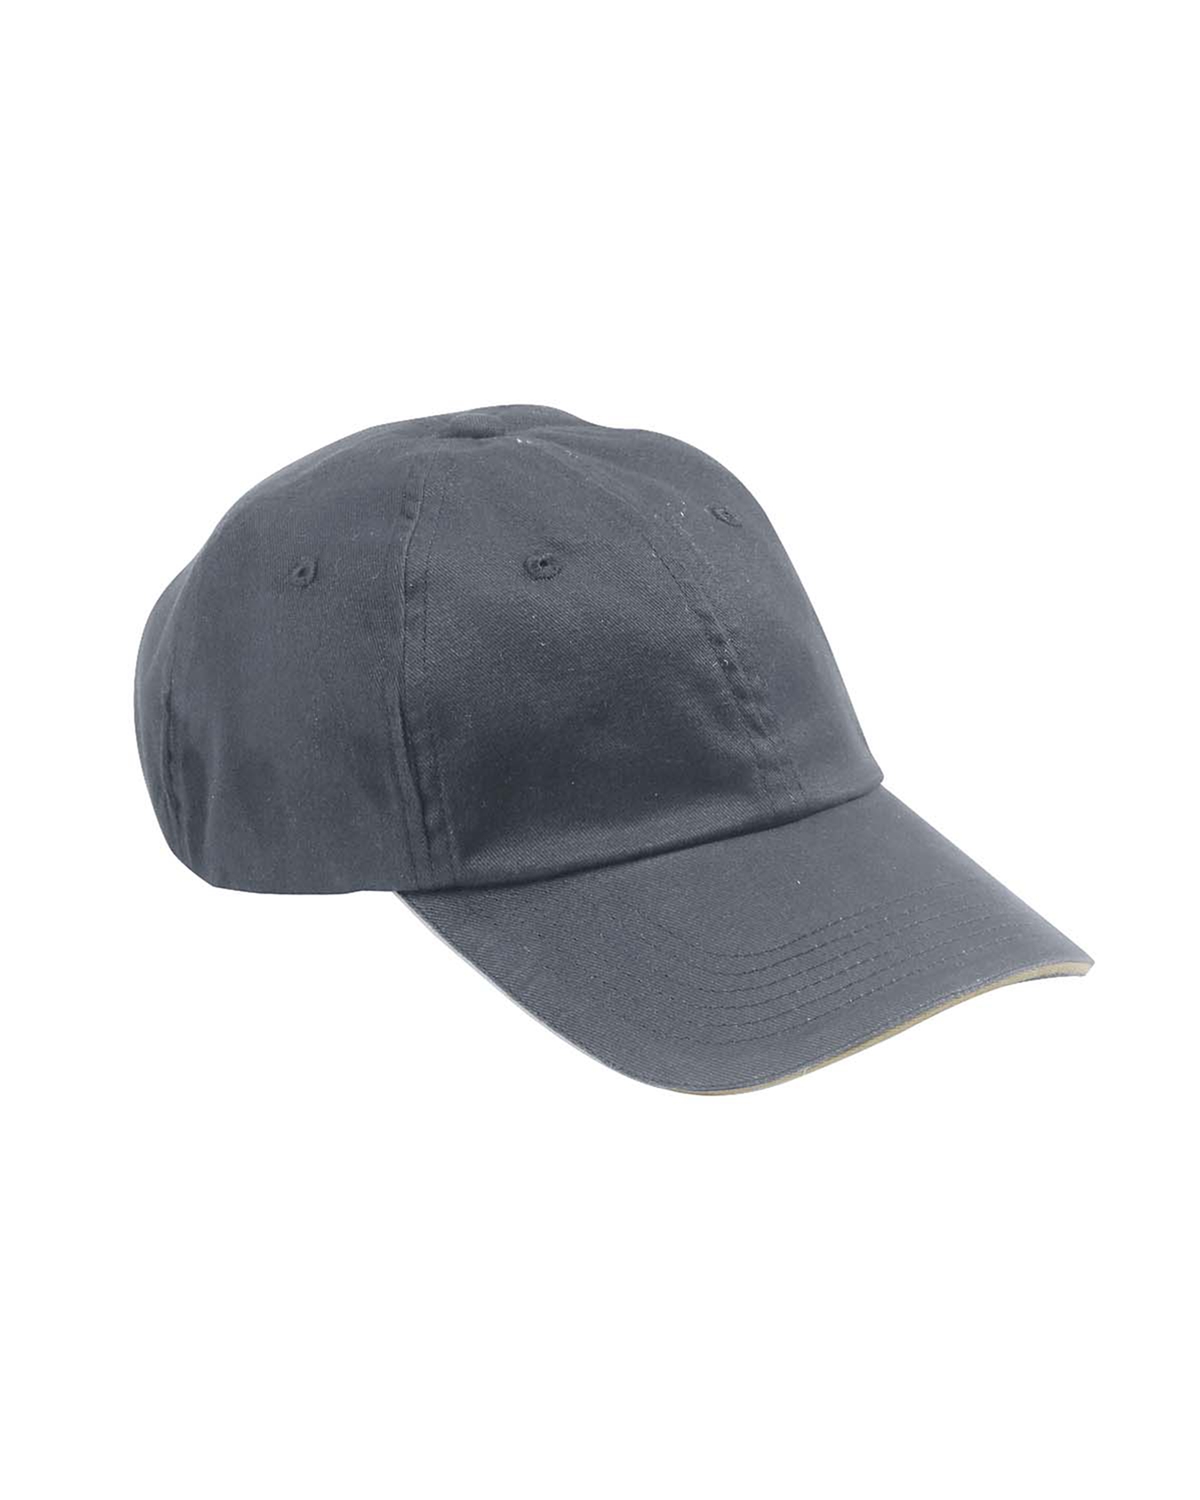 6-Panel Unstructured Cap with Sandwich Bill